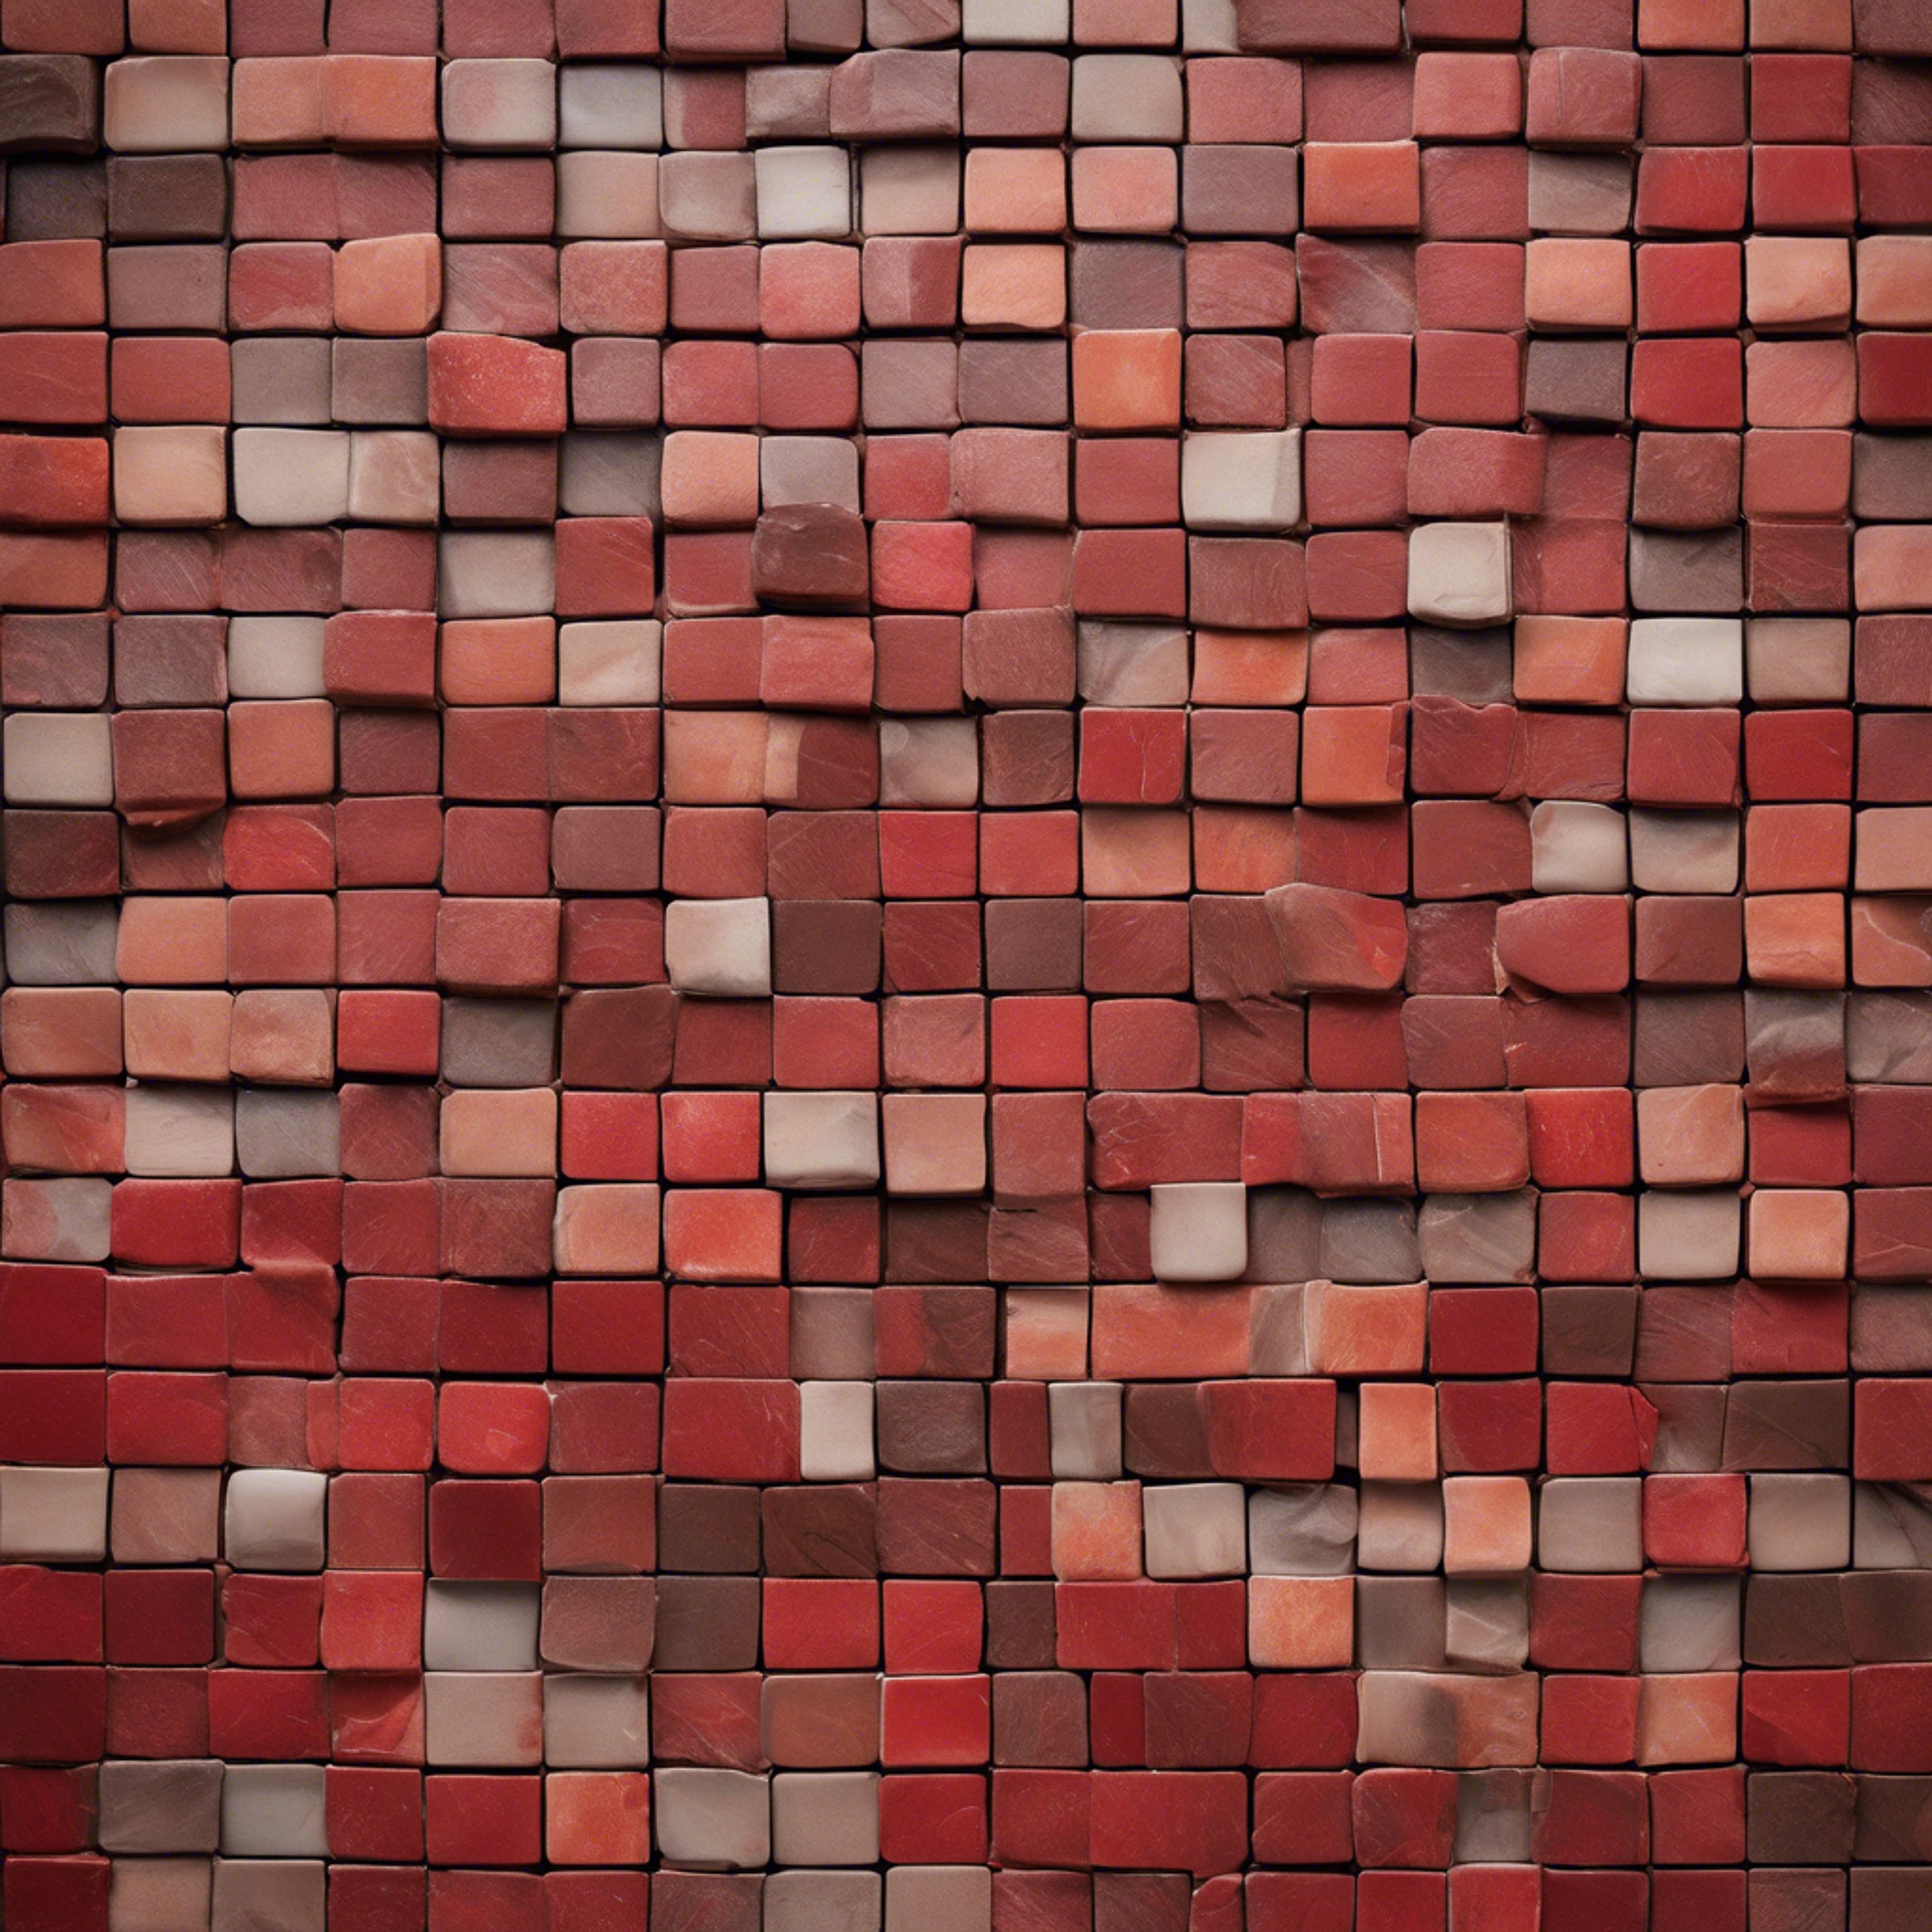 A tessellation of vibrant red and rustic brown tiles in an abstract, mosaic fashion.壁紙[f218a12c4957439fa899]